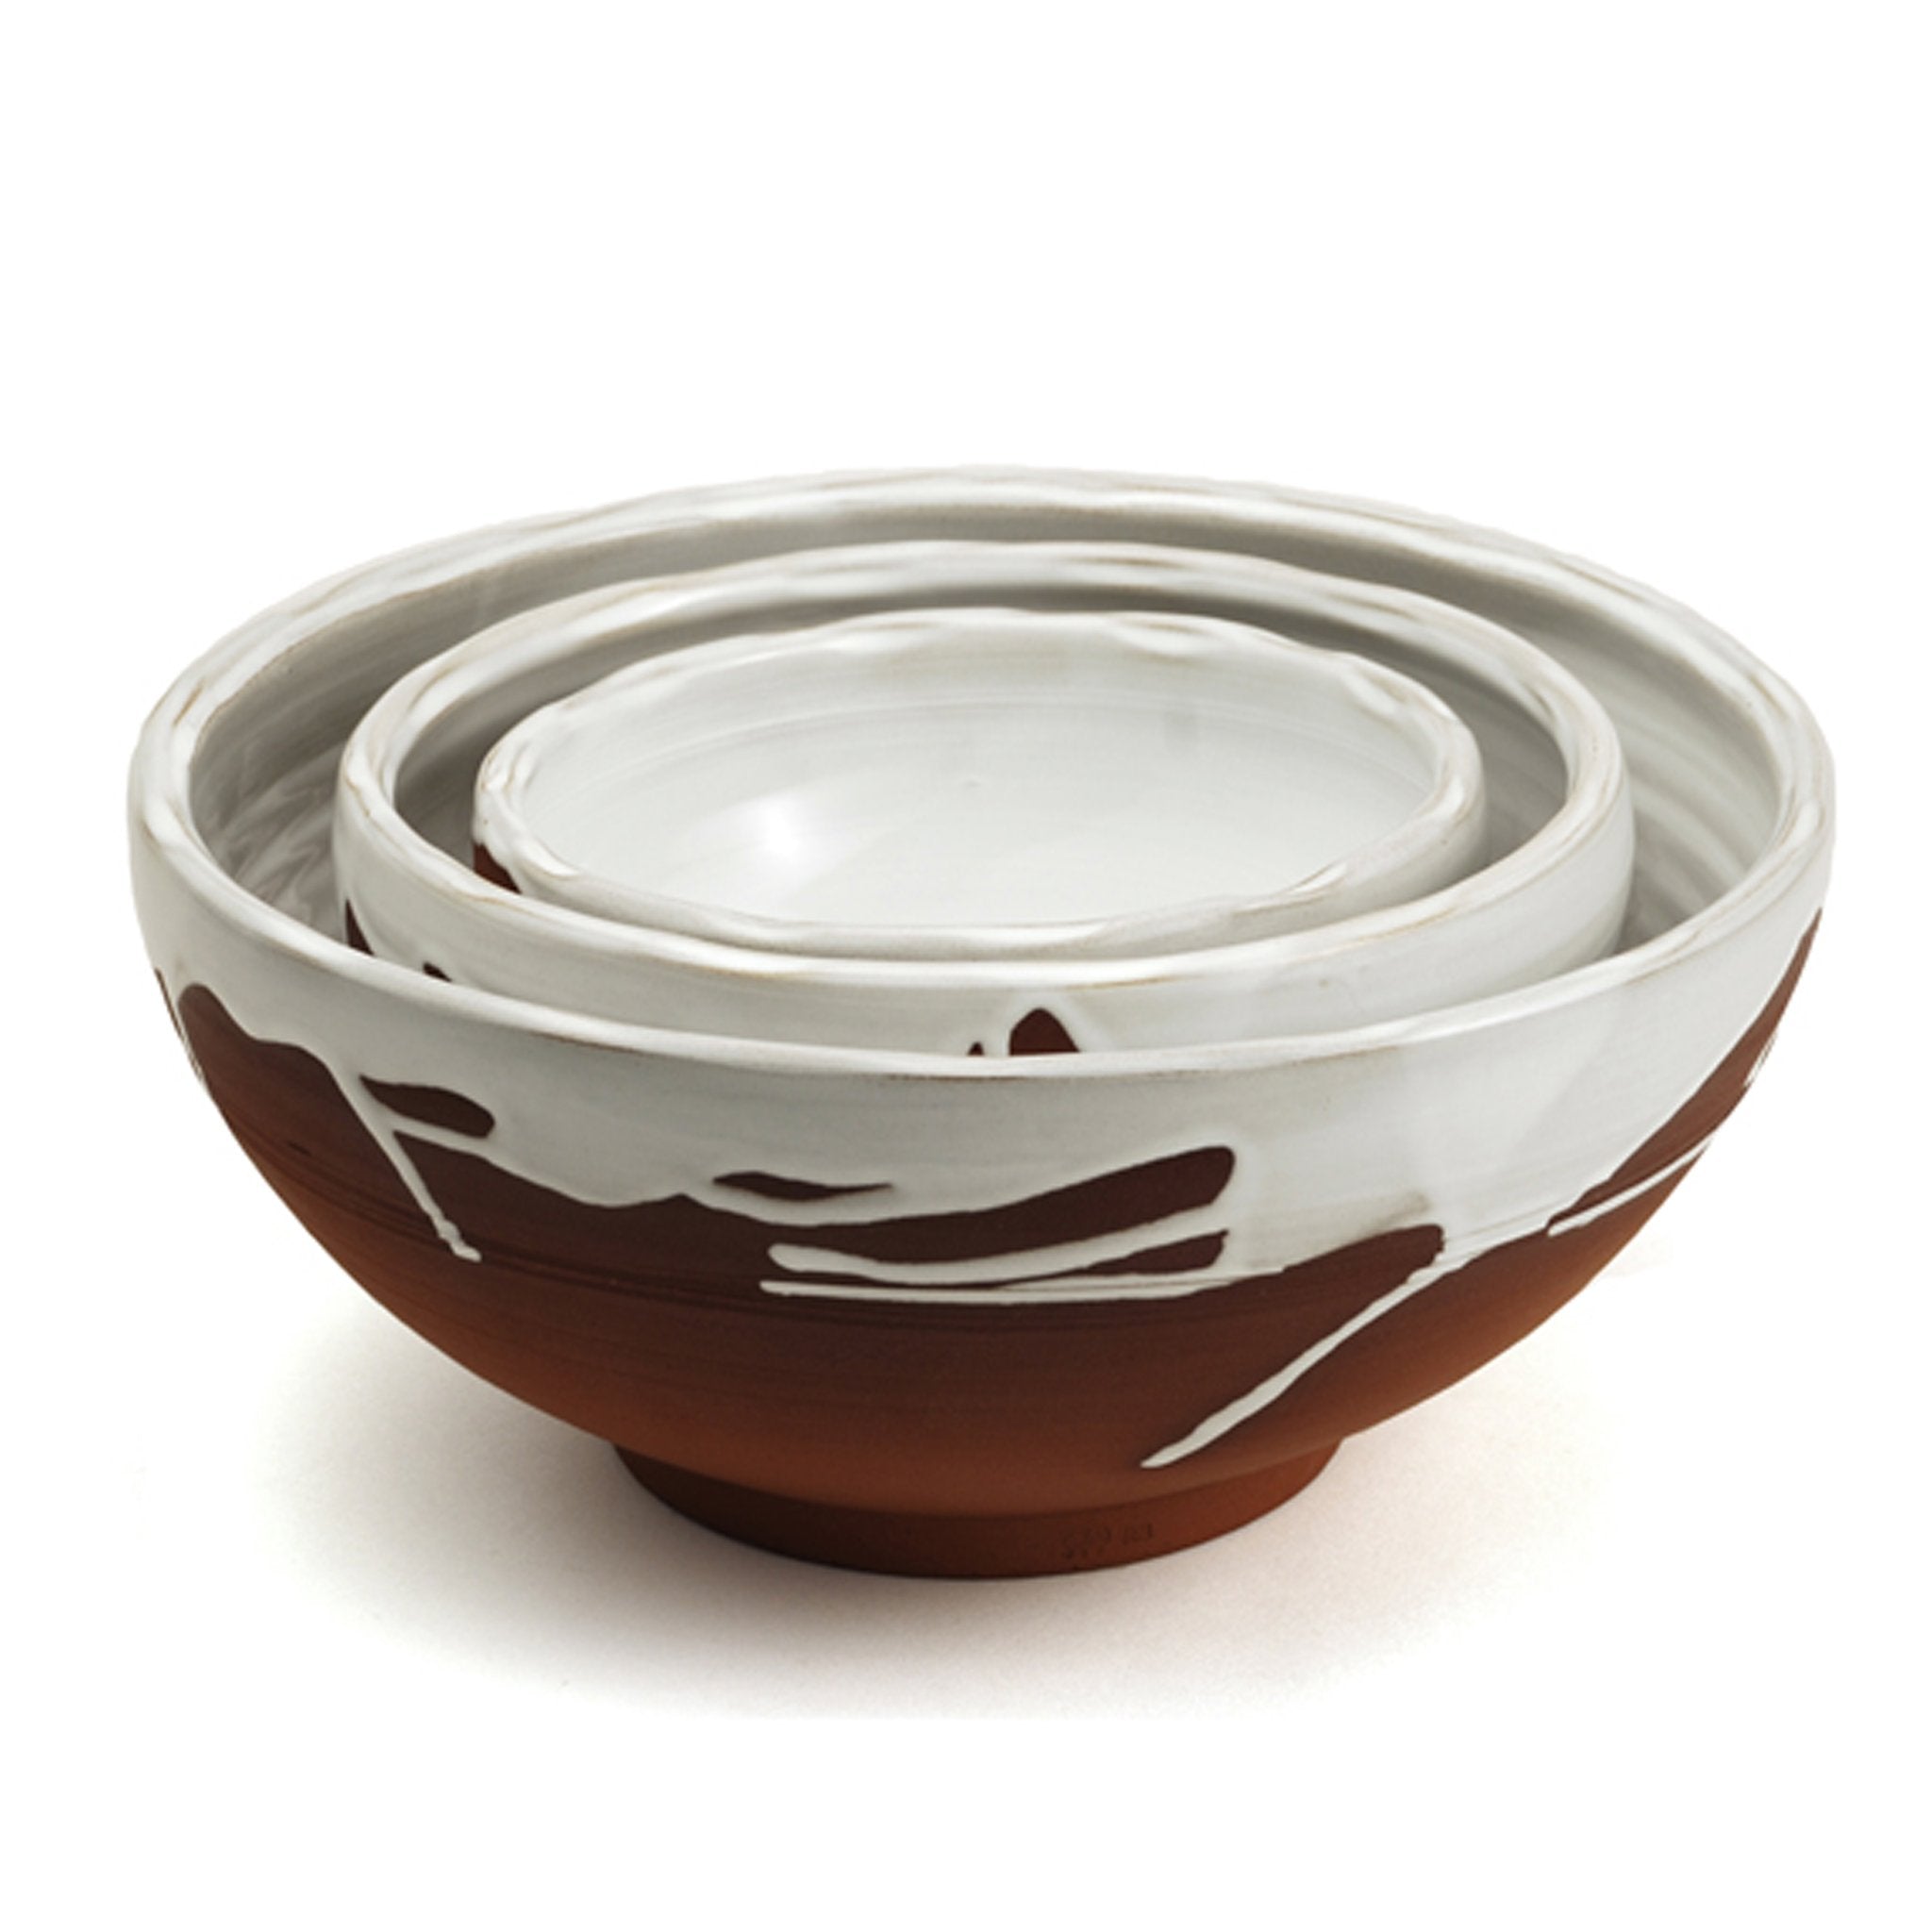 Stephen Pearce Large Decorated Bowl |2nd